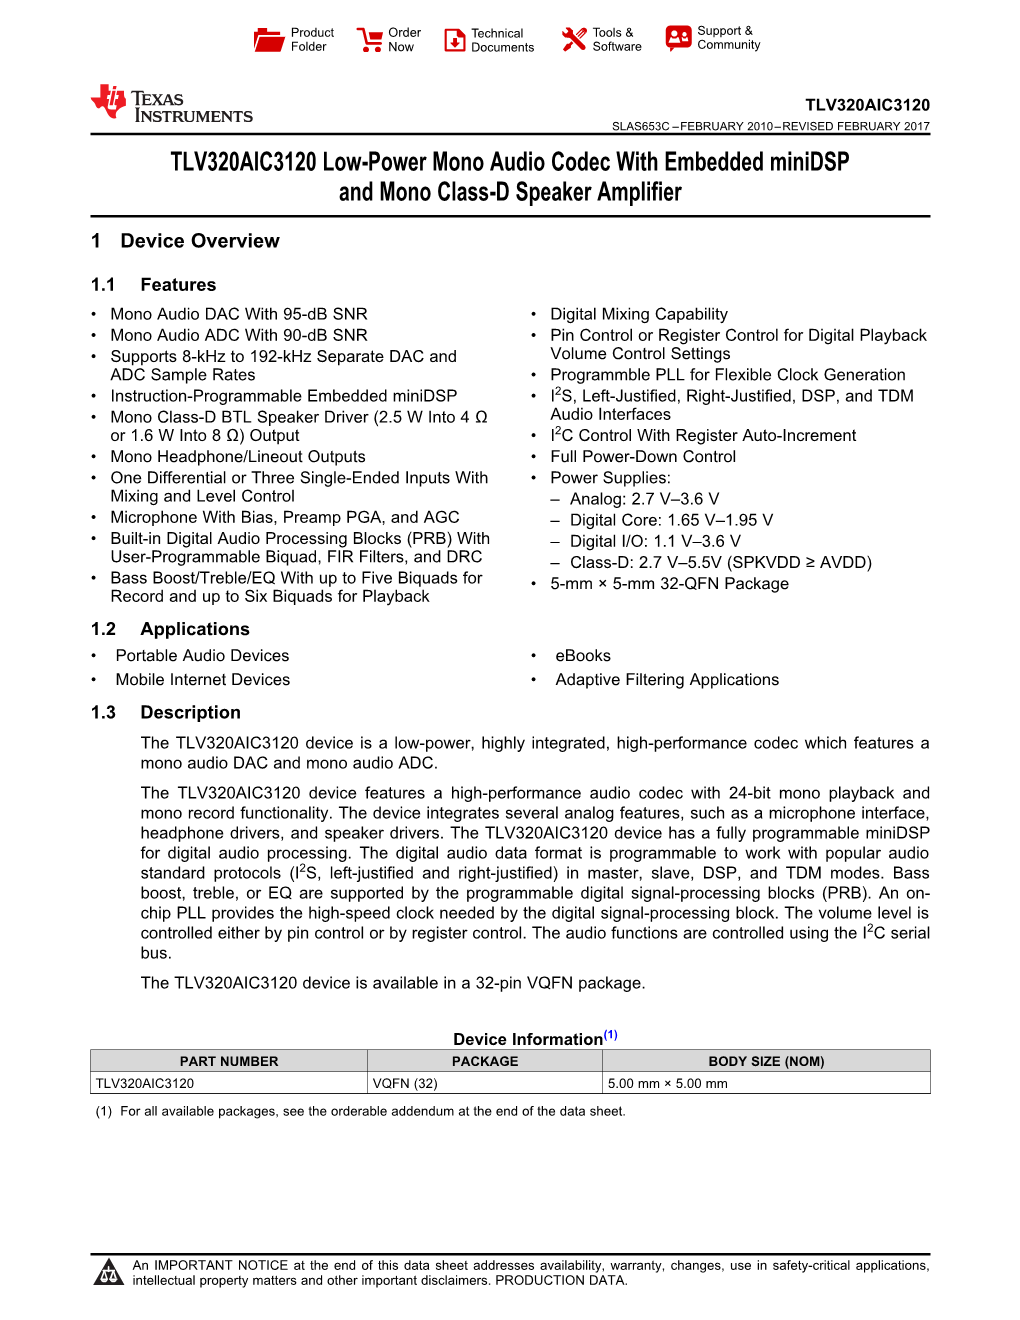 TLV320AIC3120 Low-Power Mono Audio Codec with Embedded Minidsp and Mono Class-D Speaker Amplifier Datasheet (Rev. C)